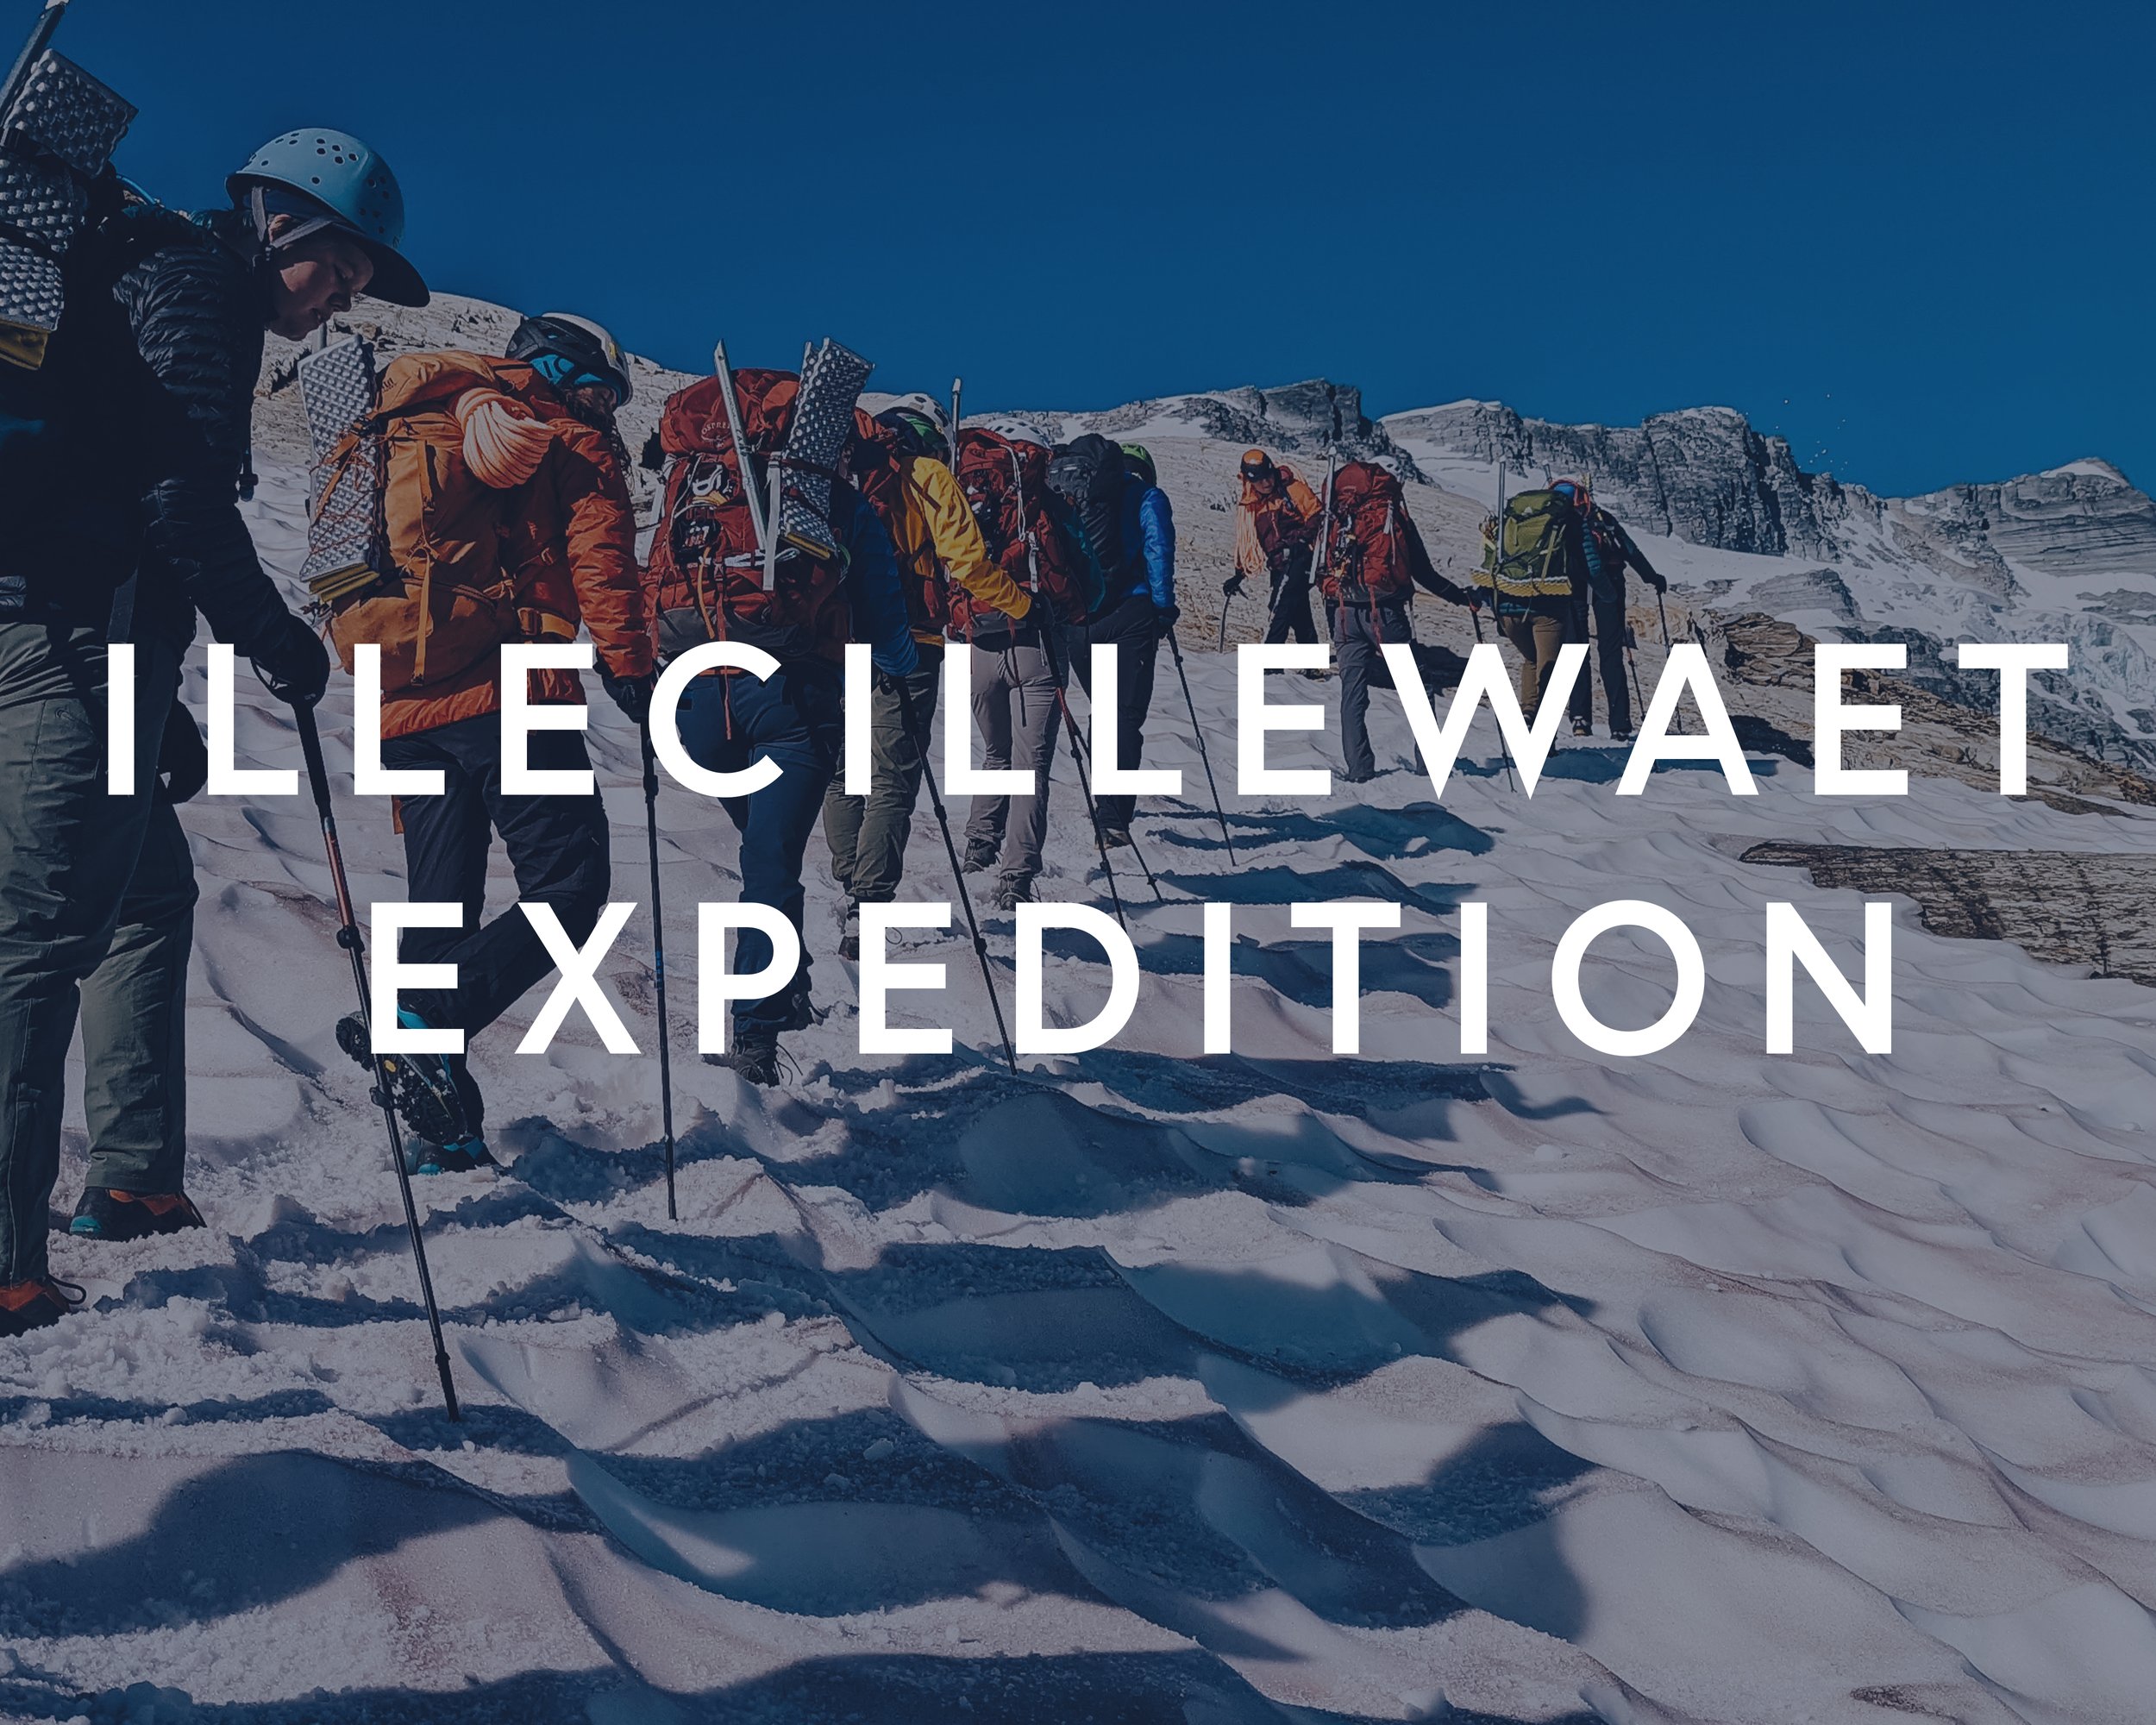 Image links to the Illecillewaet expedition information page (Copy)